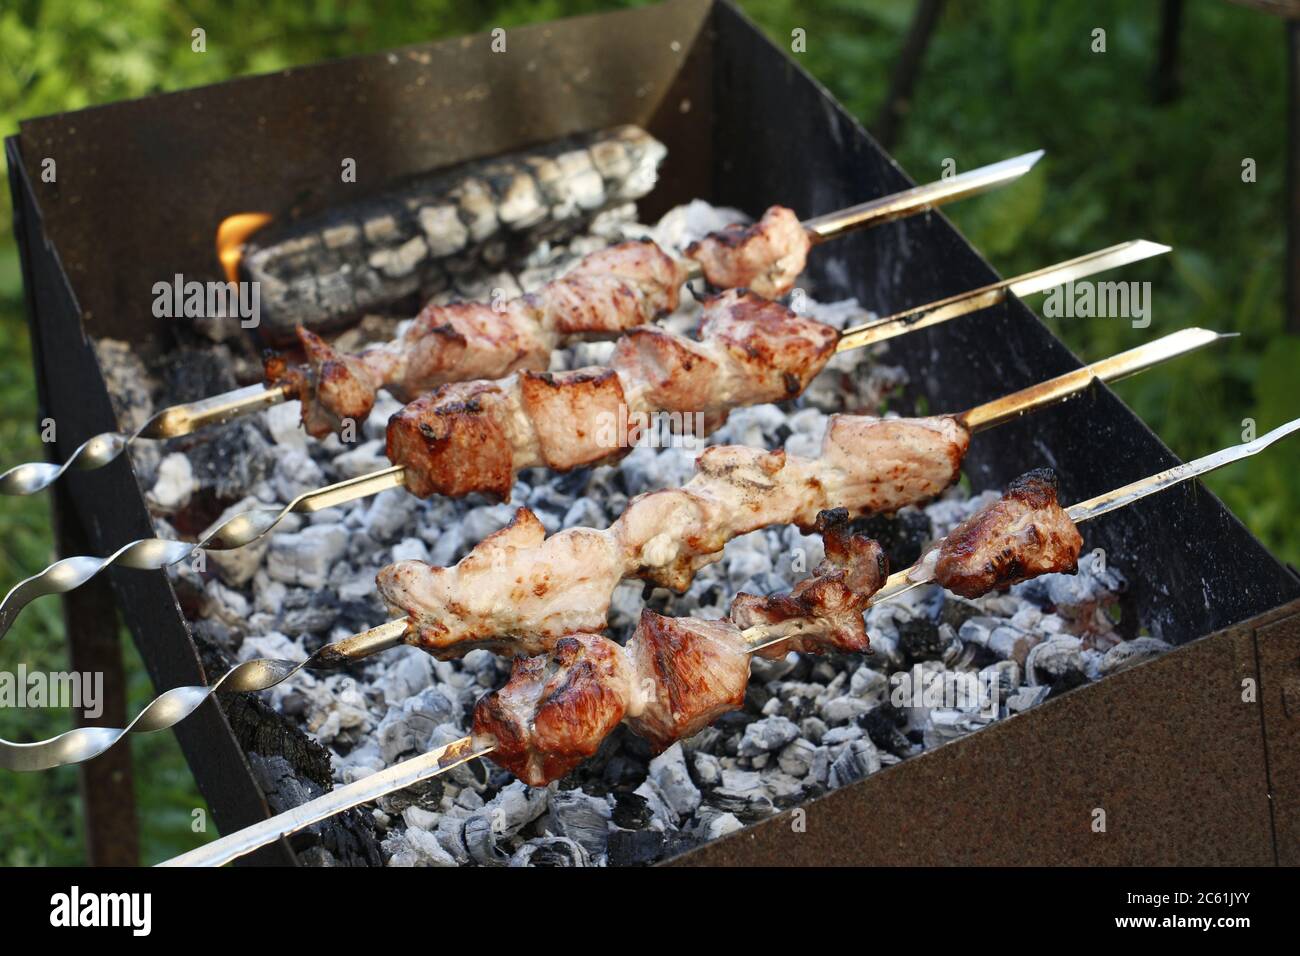 Cooking barbecue skewers. Marinated kebab is grilled on charcoal. Shish kebab barbecue was made of lamb, pork, beef, chicken. Roast beef skewers on ba Stock Photo